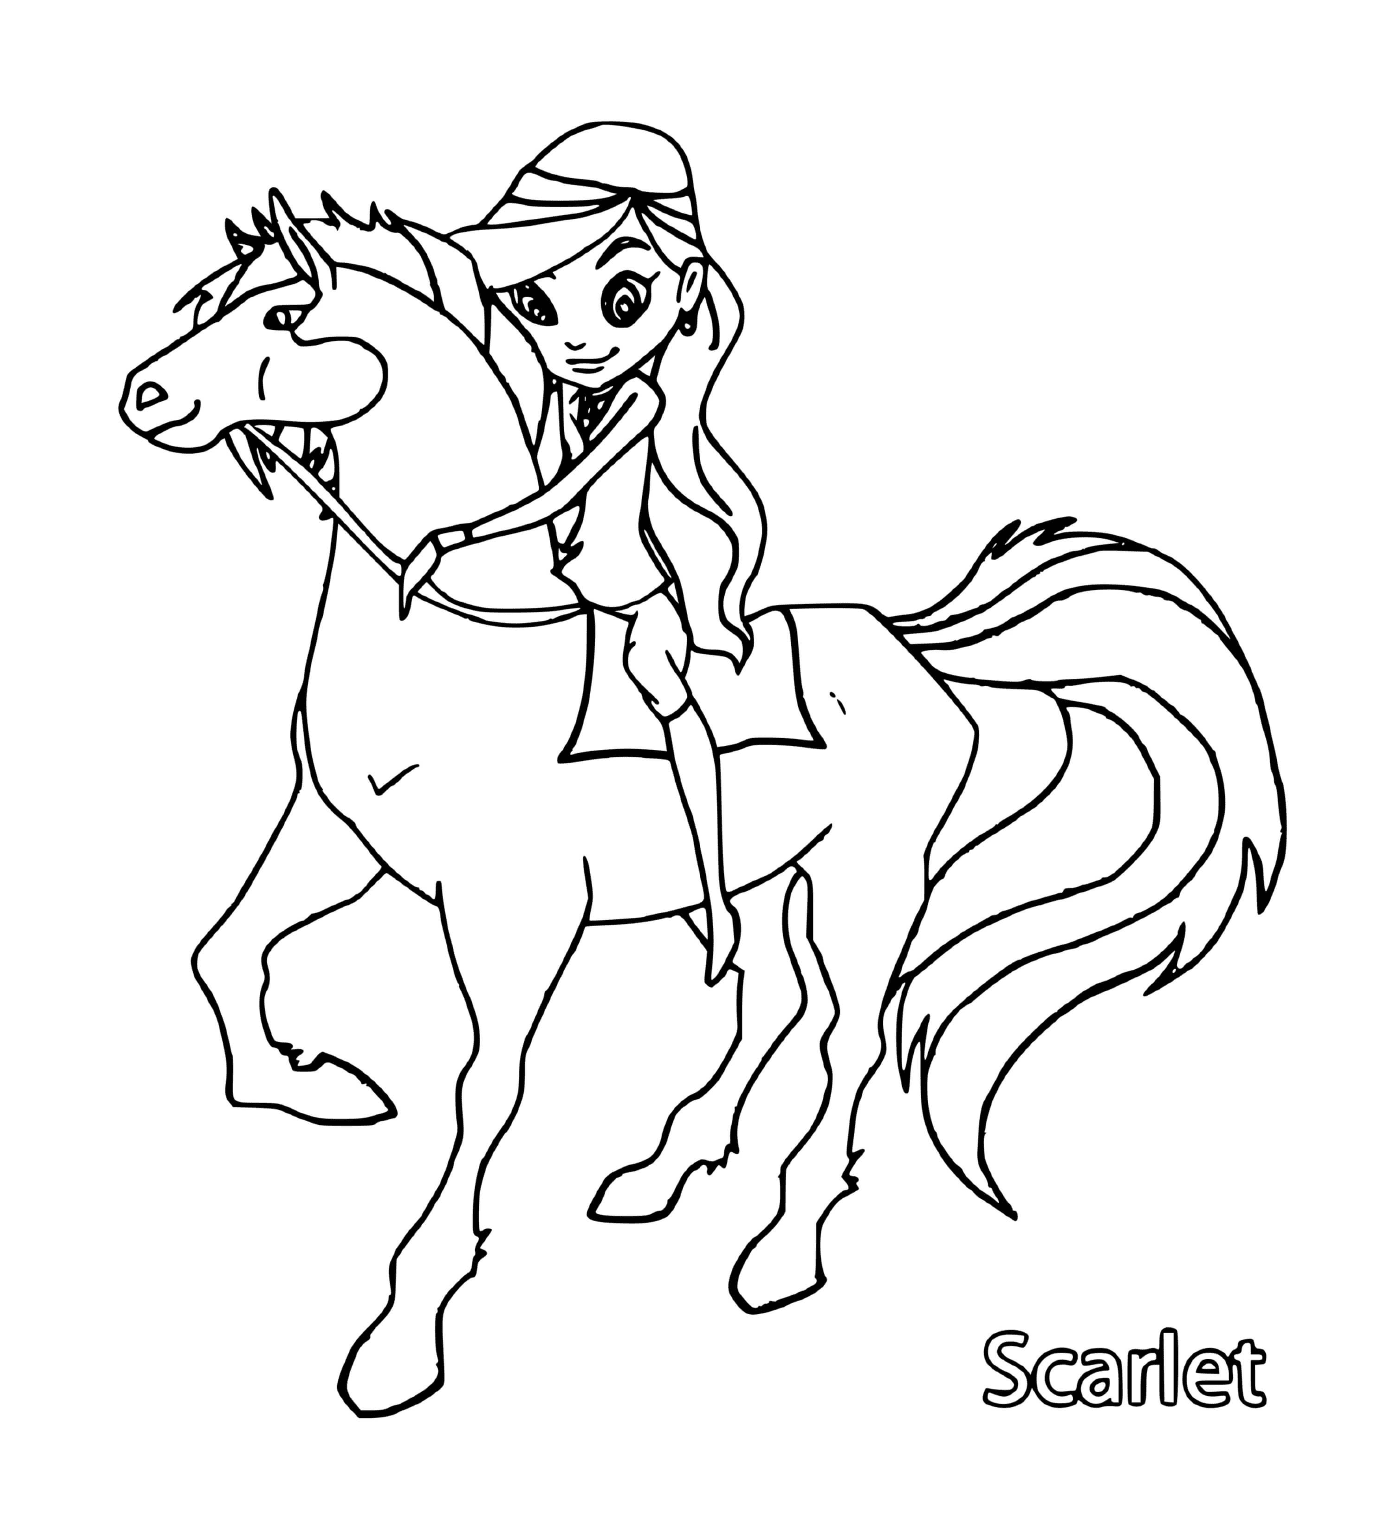 coloriage scarlet horseland